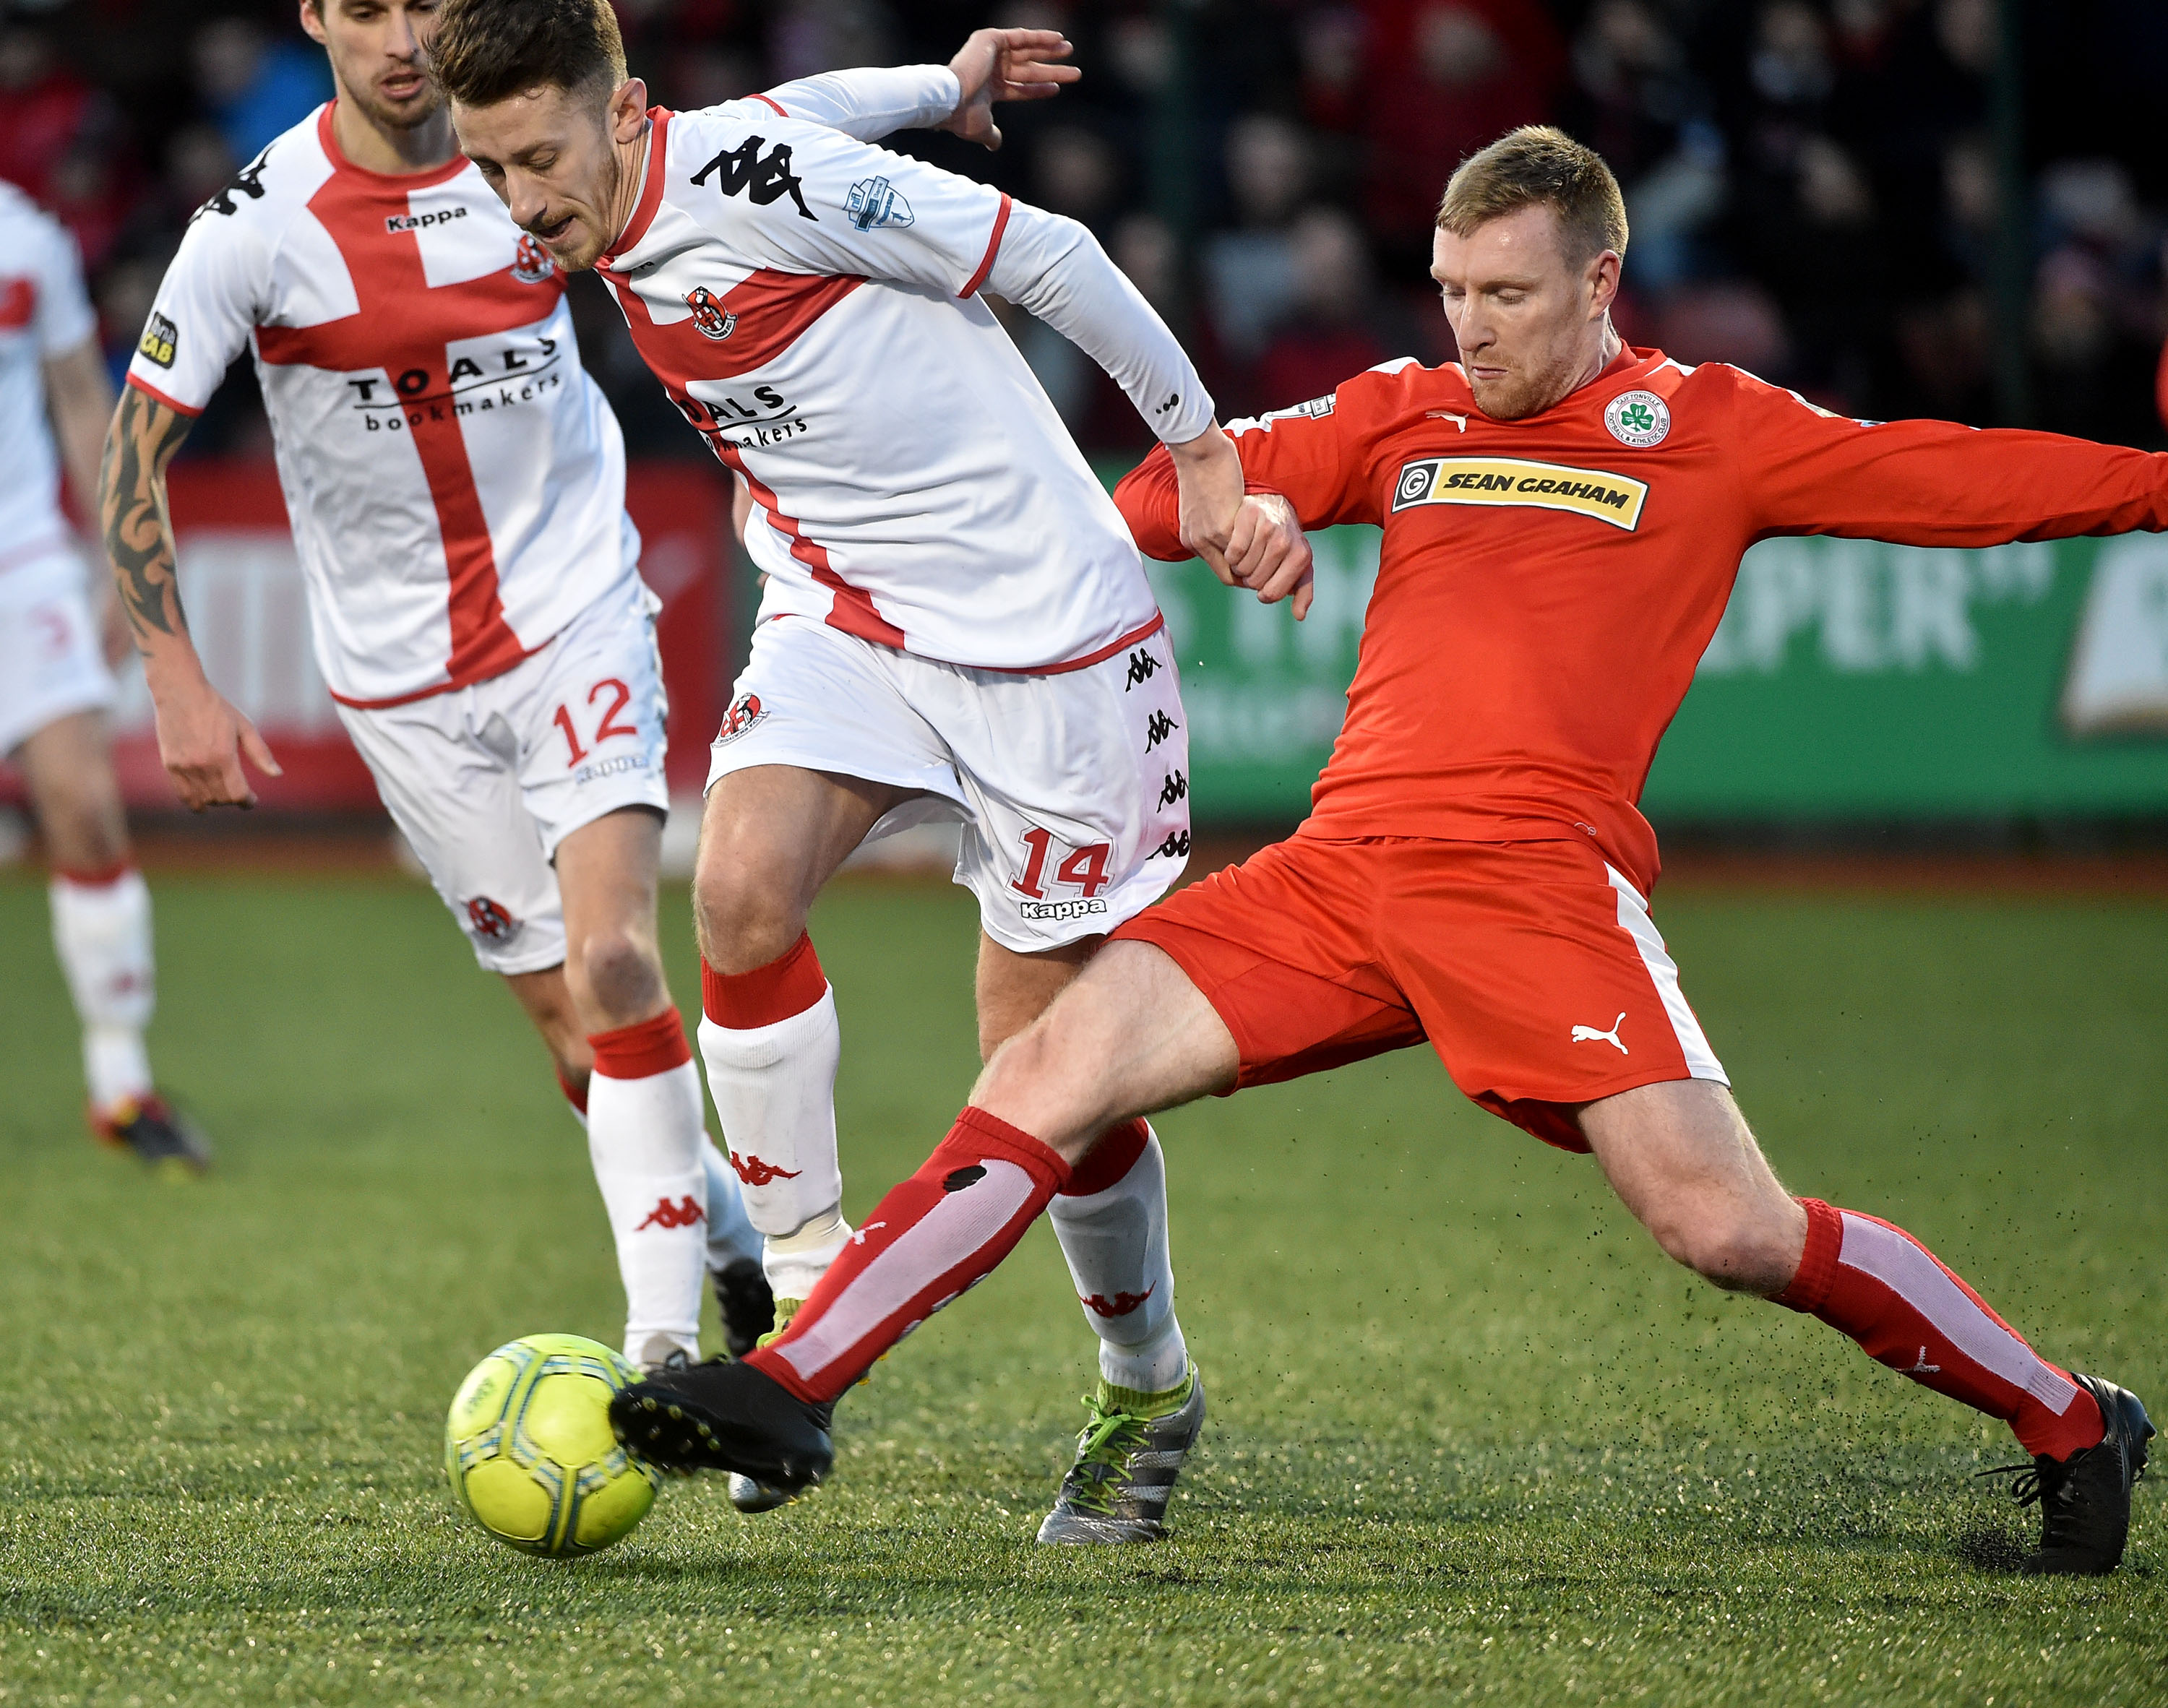 Cliftonville’s Chris Curran in action with Jordan Forsythe of Crusaders during the North Belfast derby on St Stephen’s Day. Reds boss Gerard Lyttle has called on his side to bounce back from their 4-0 defeat when they face Glenavon on Friday night 